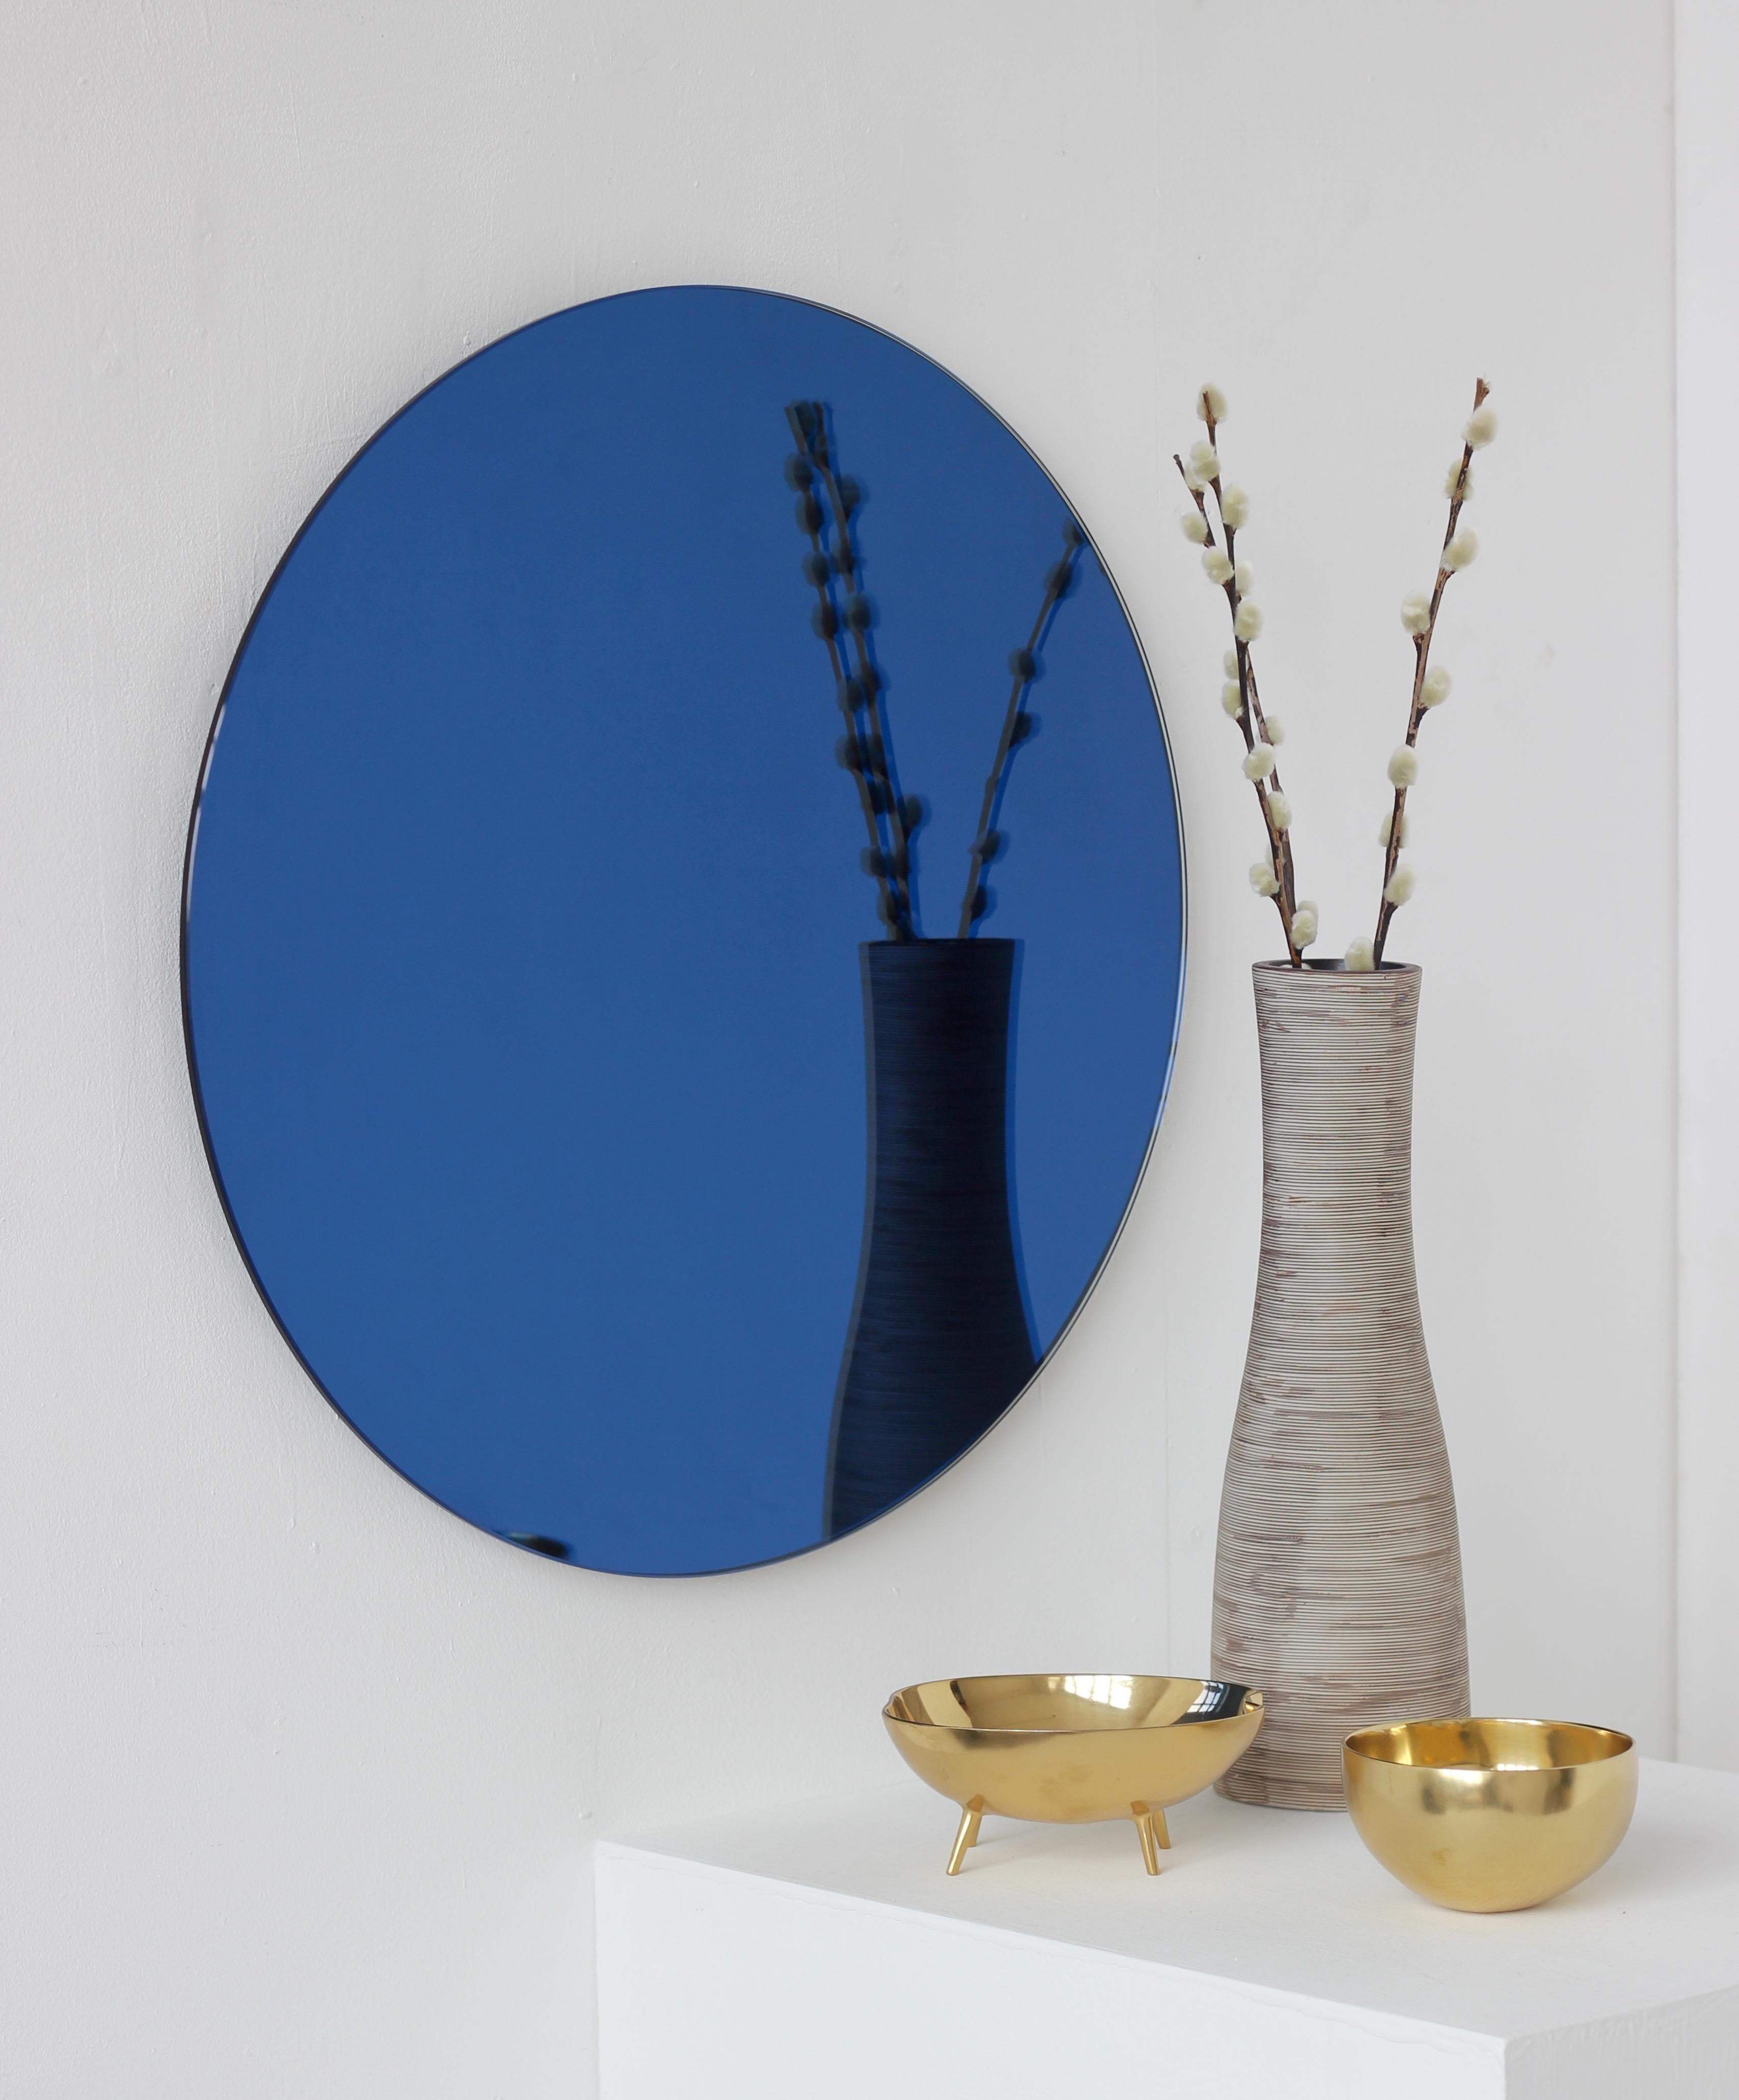 Charming and minimalist blue tinted round frameless mirror with a floating effect. Quality design that ensures the mirror sits perfectly parallel to the wall. Designed and made in London, UK. This mirror is fully customizable.

Fitted with